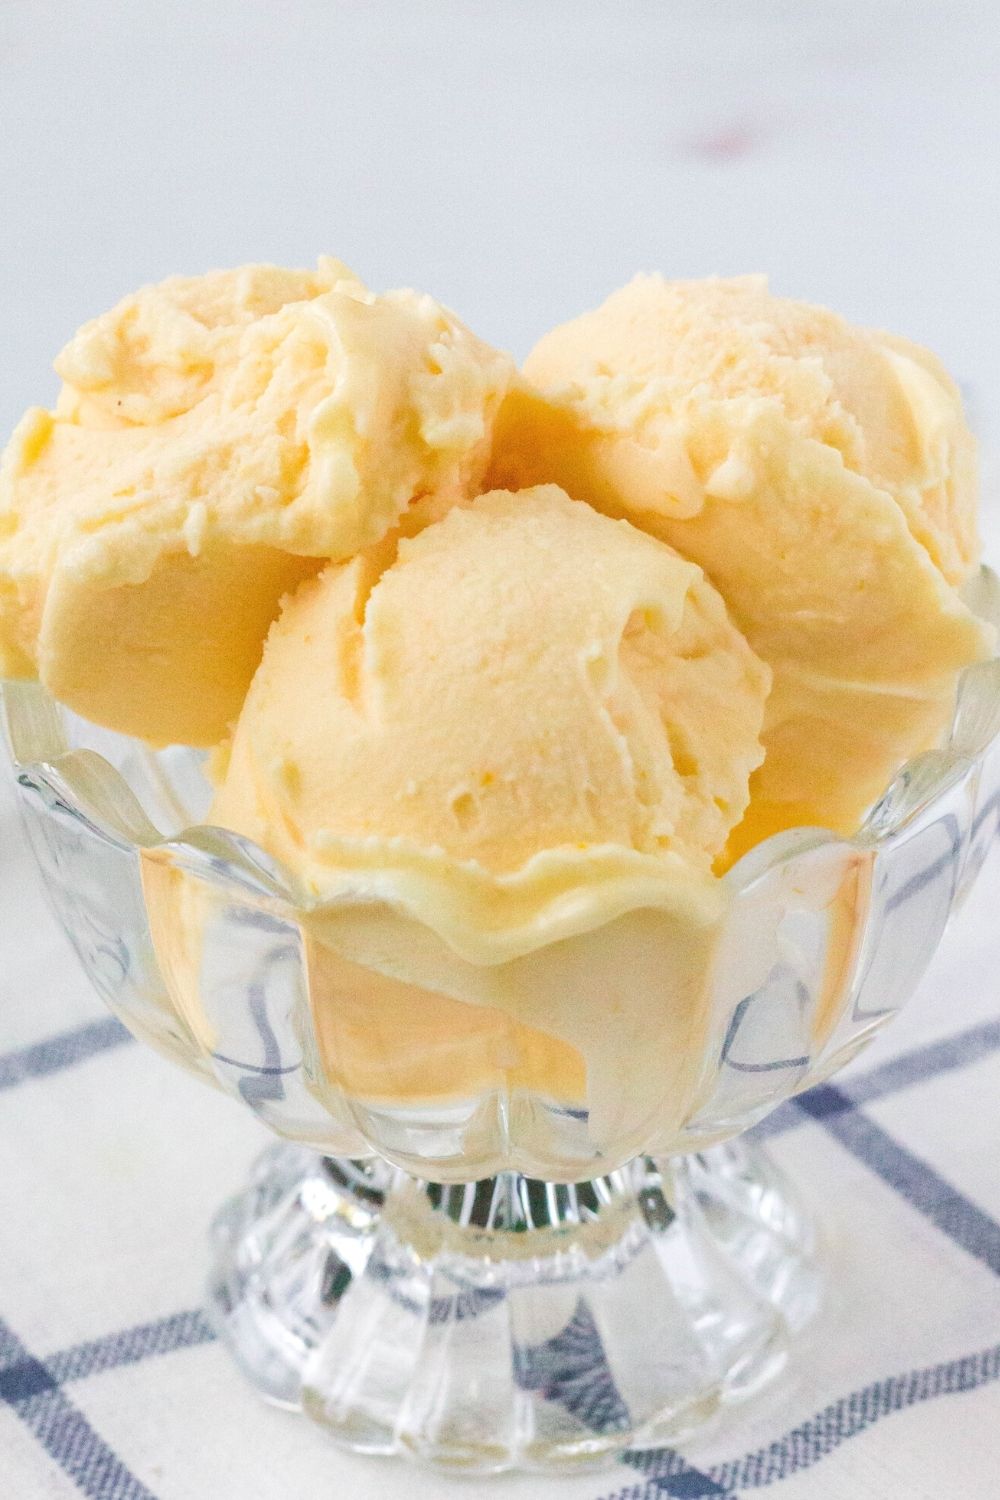 three scoops of Ninja Creami orange sherbet are served in a small glass dessert cup.